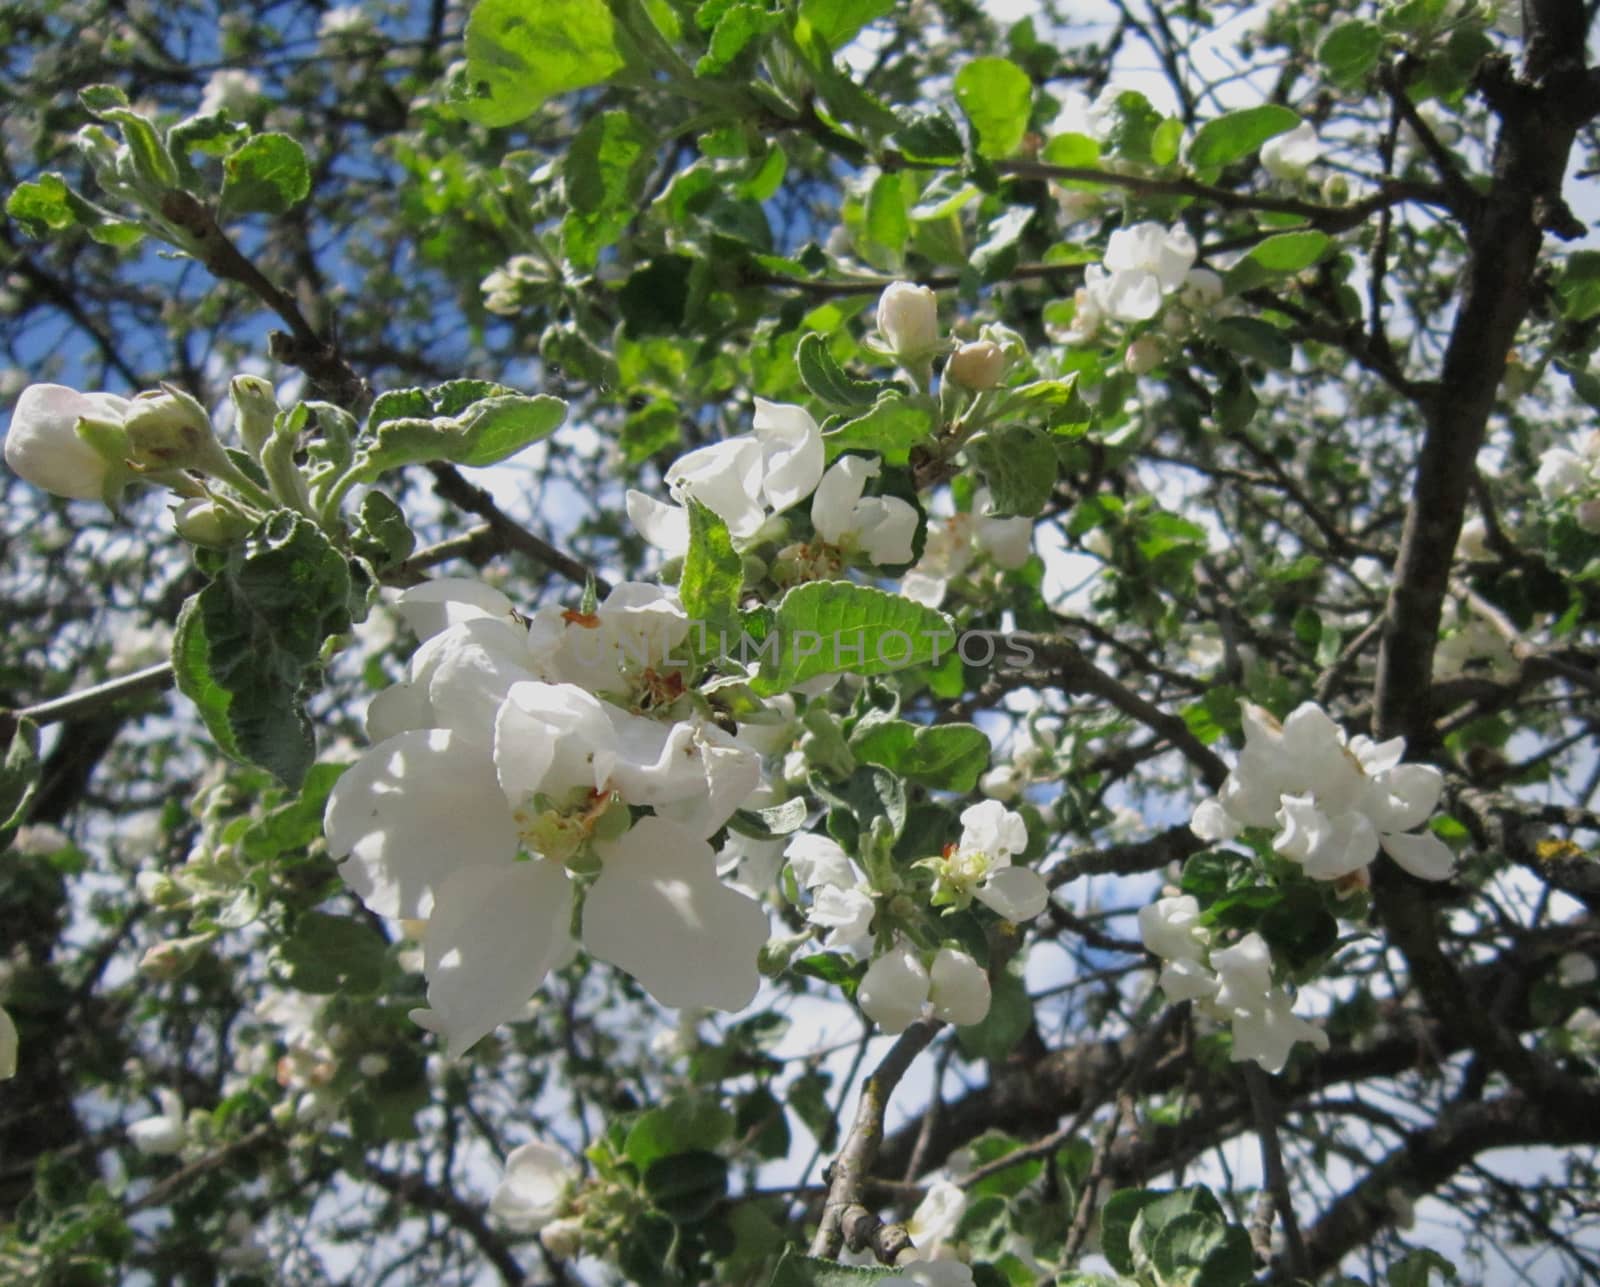 The branch of a flowering Apple tree